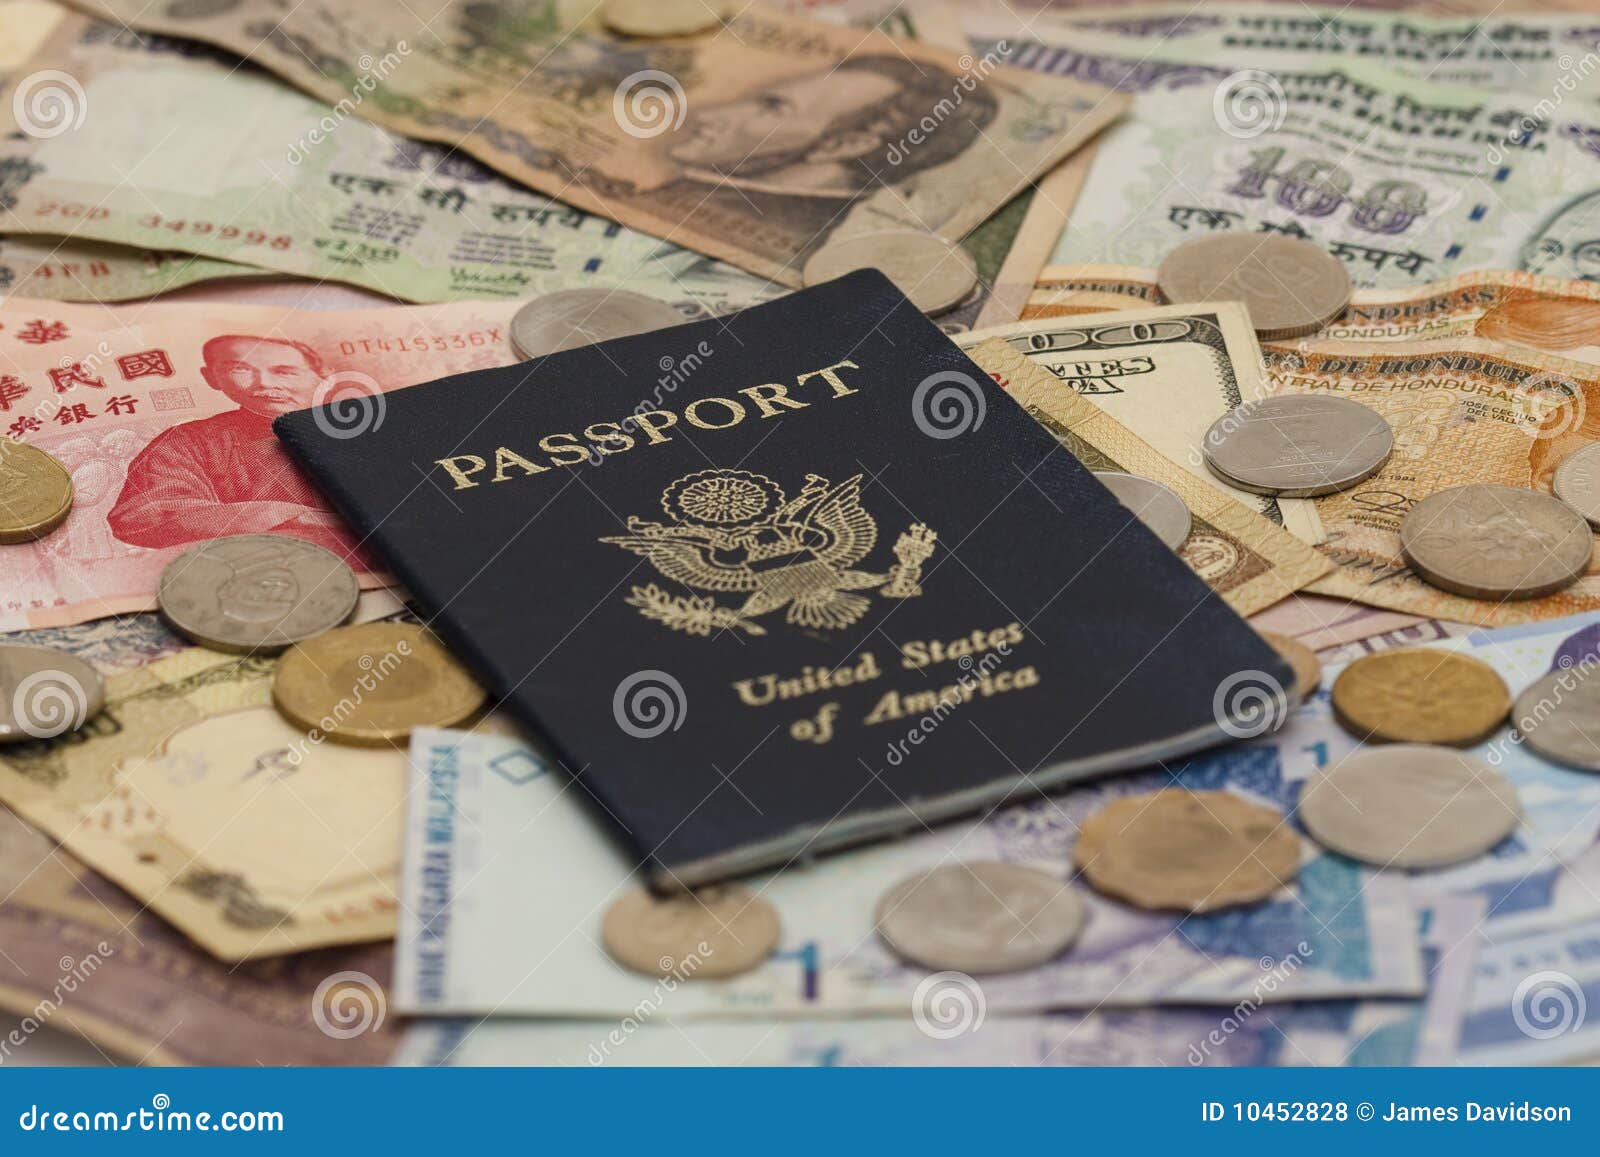 passport with foreign money